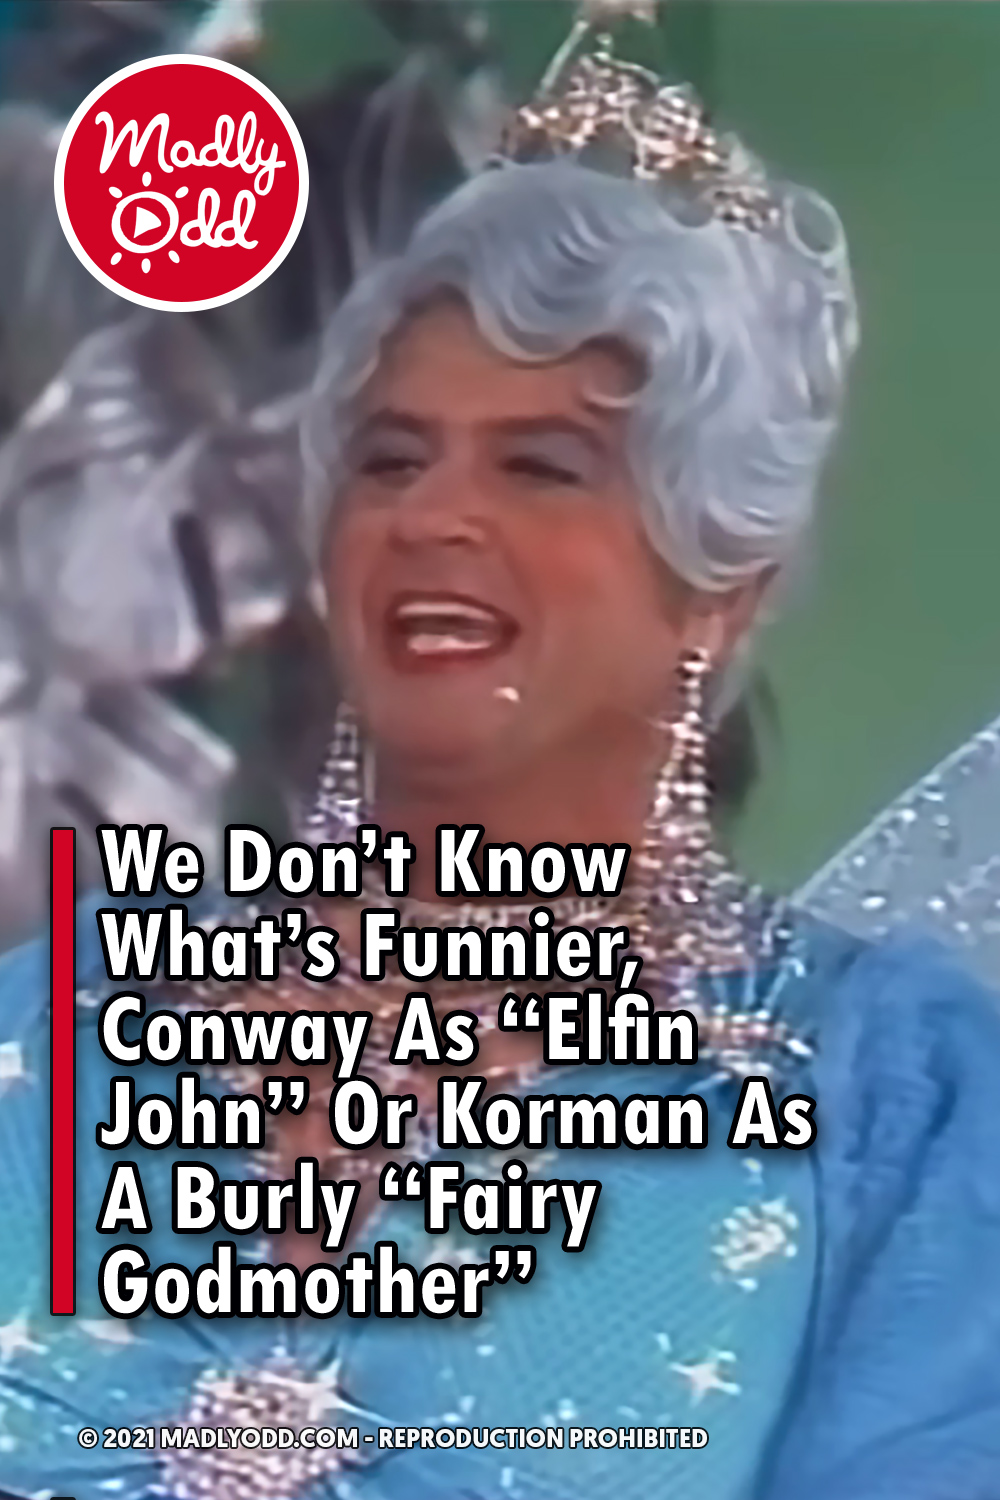 We Don’t Know What’s Funnier, Conway As “Elfin John” Or Korman As A Burly “Fairy Godmother”